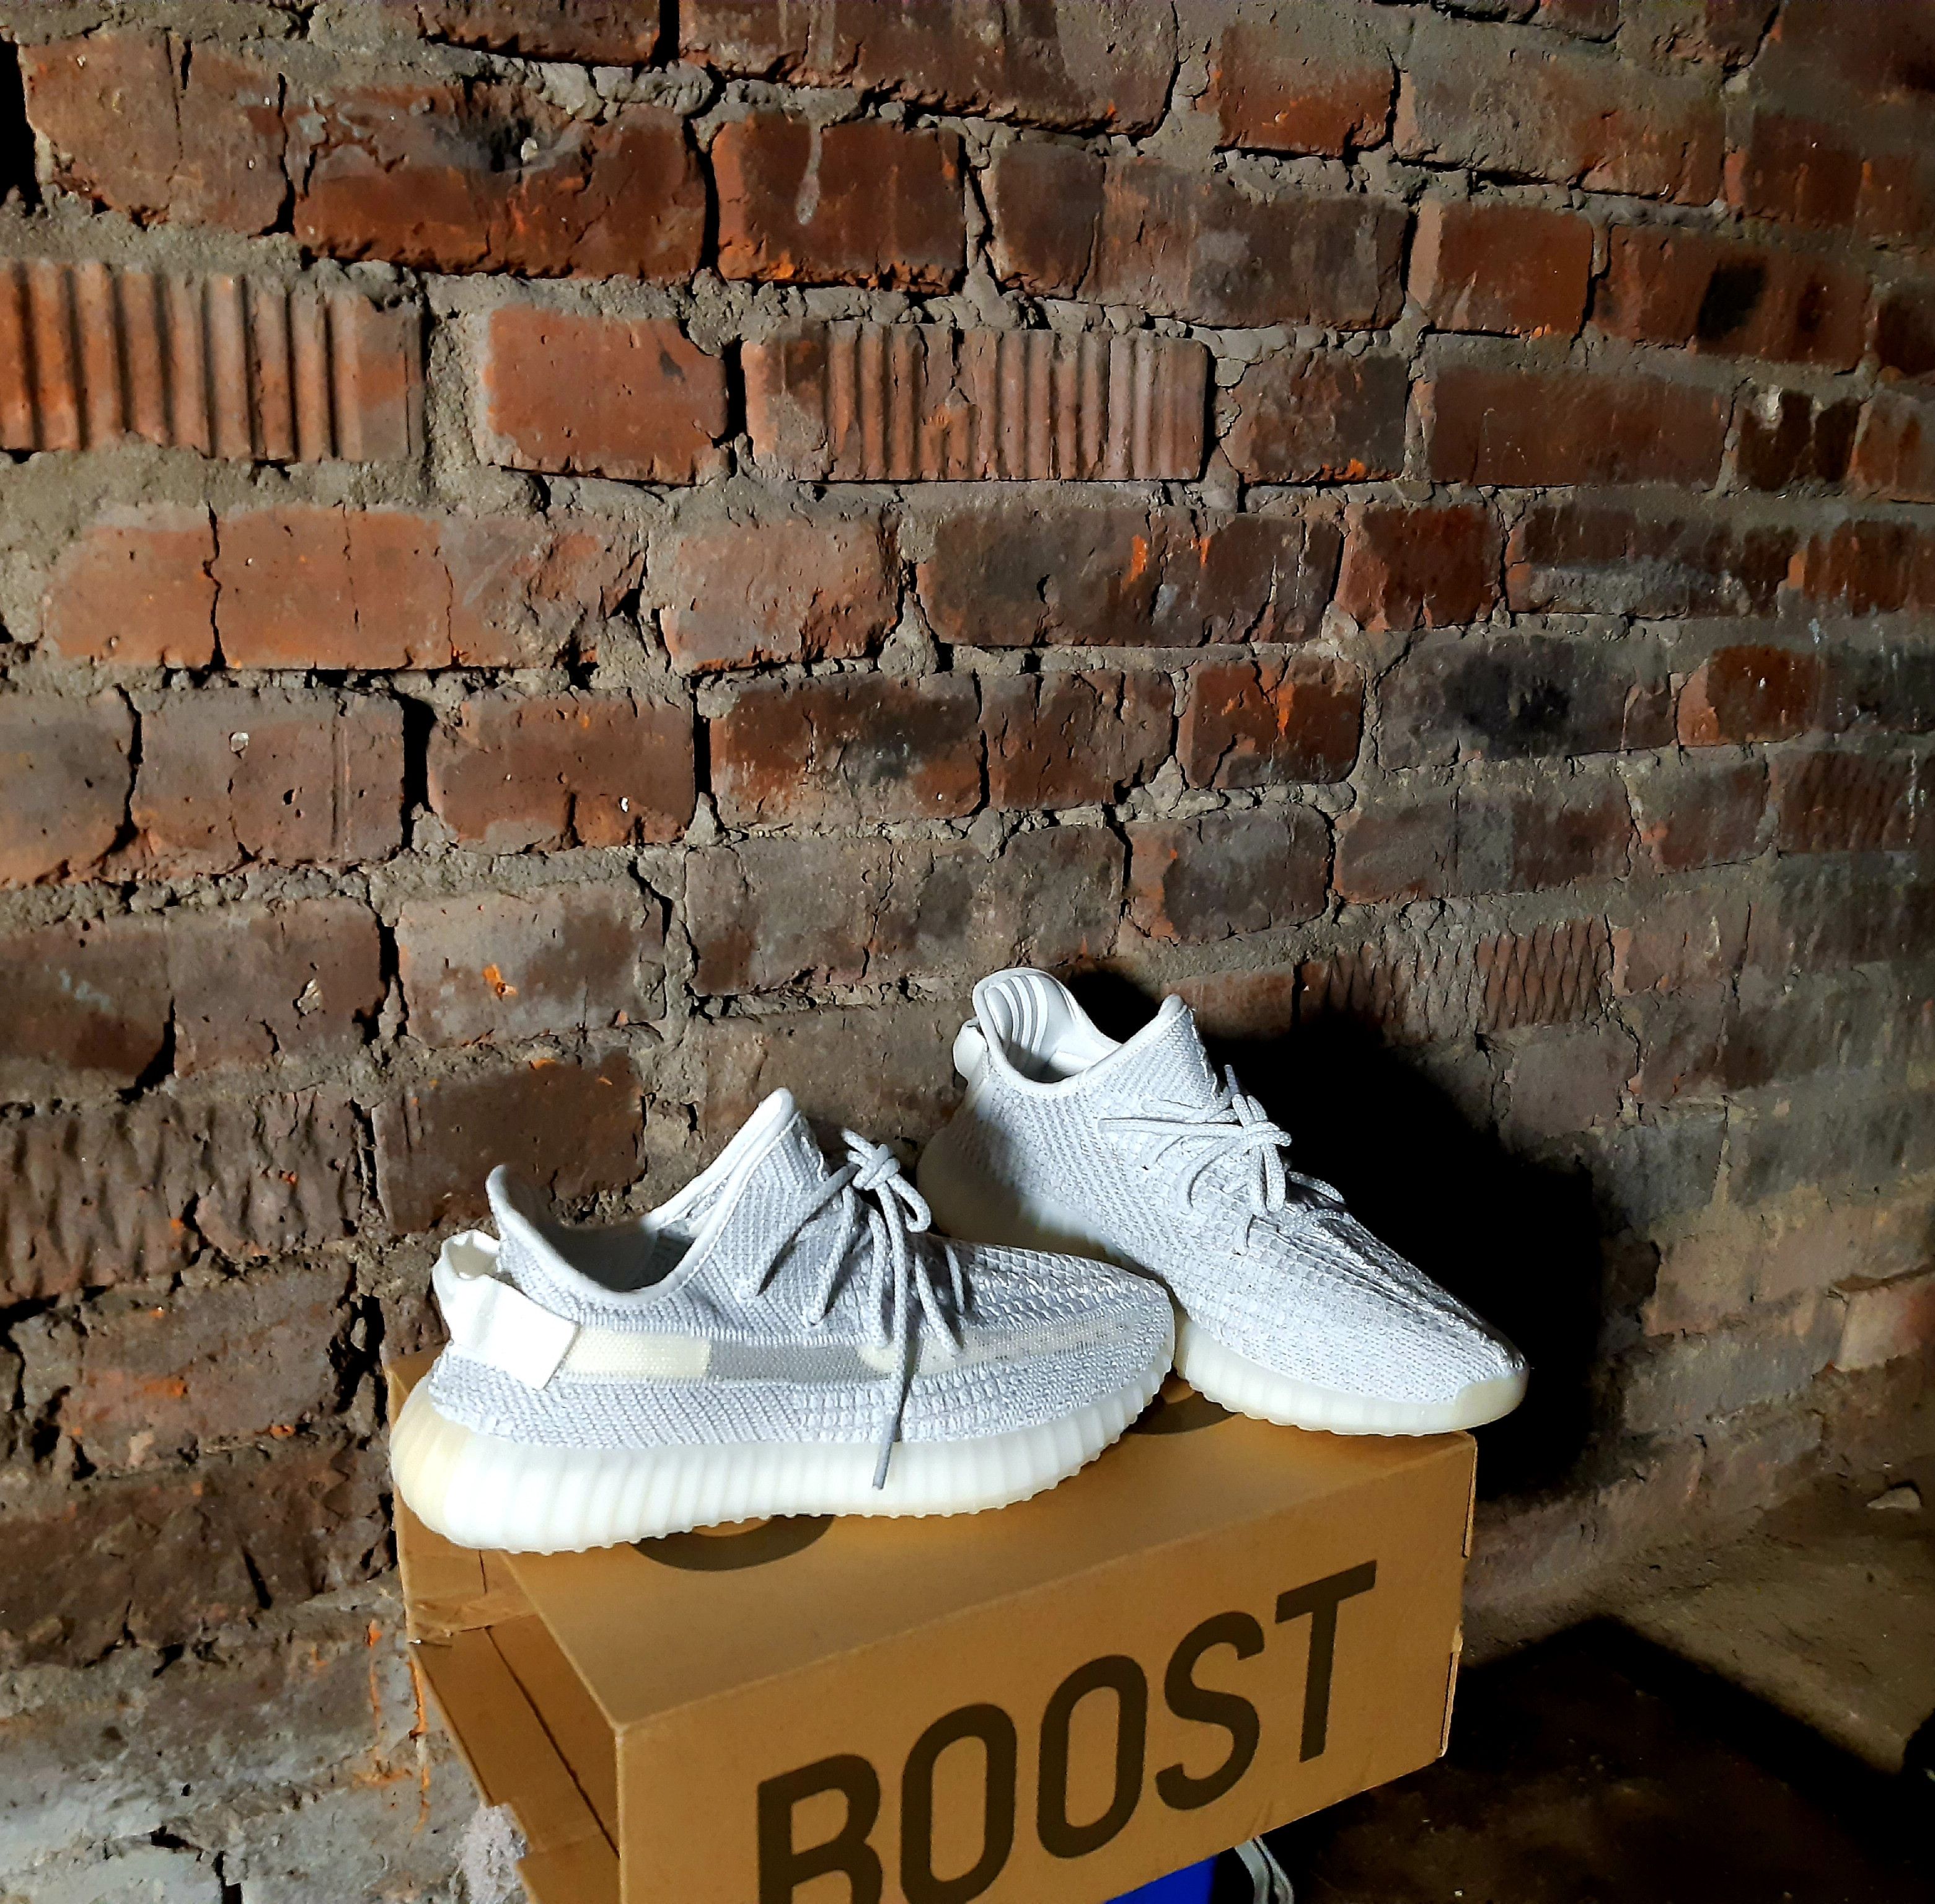 Adidas Kanye West yeezy boost 350 v2 *3M reflective* Size US 8 / EU 41 - 4 Preview